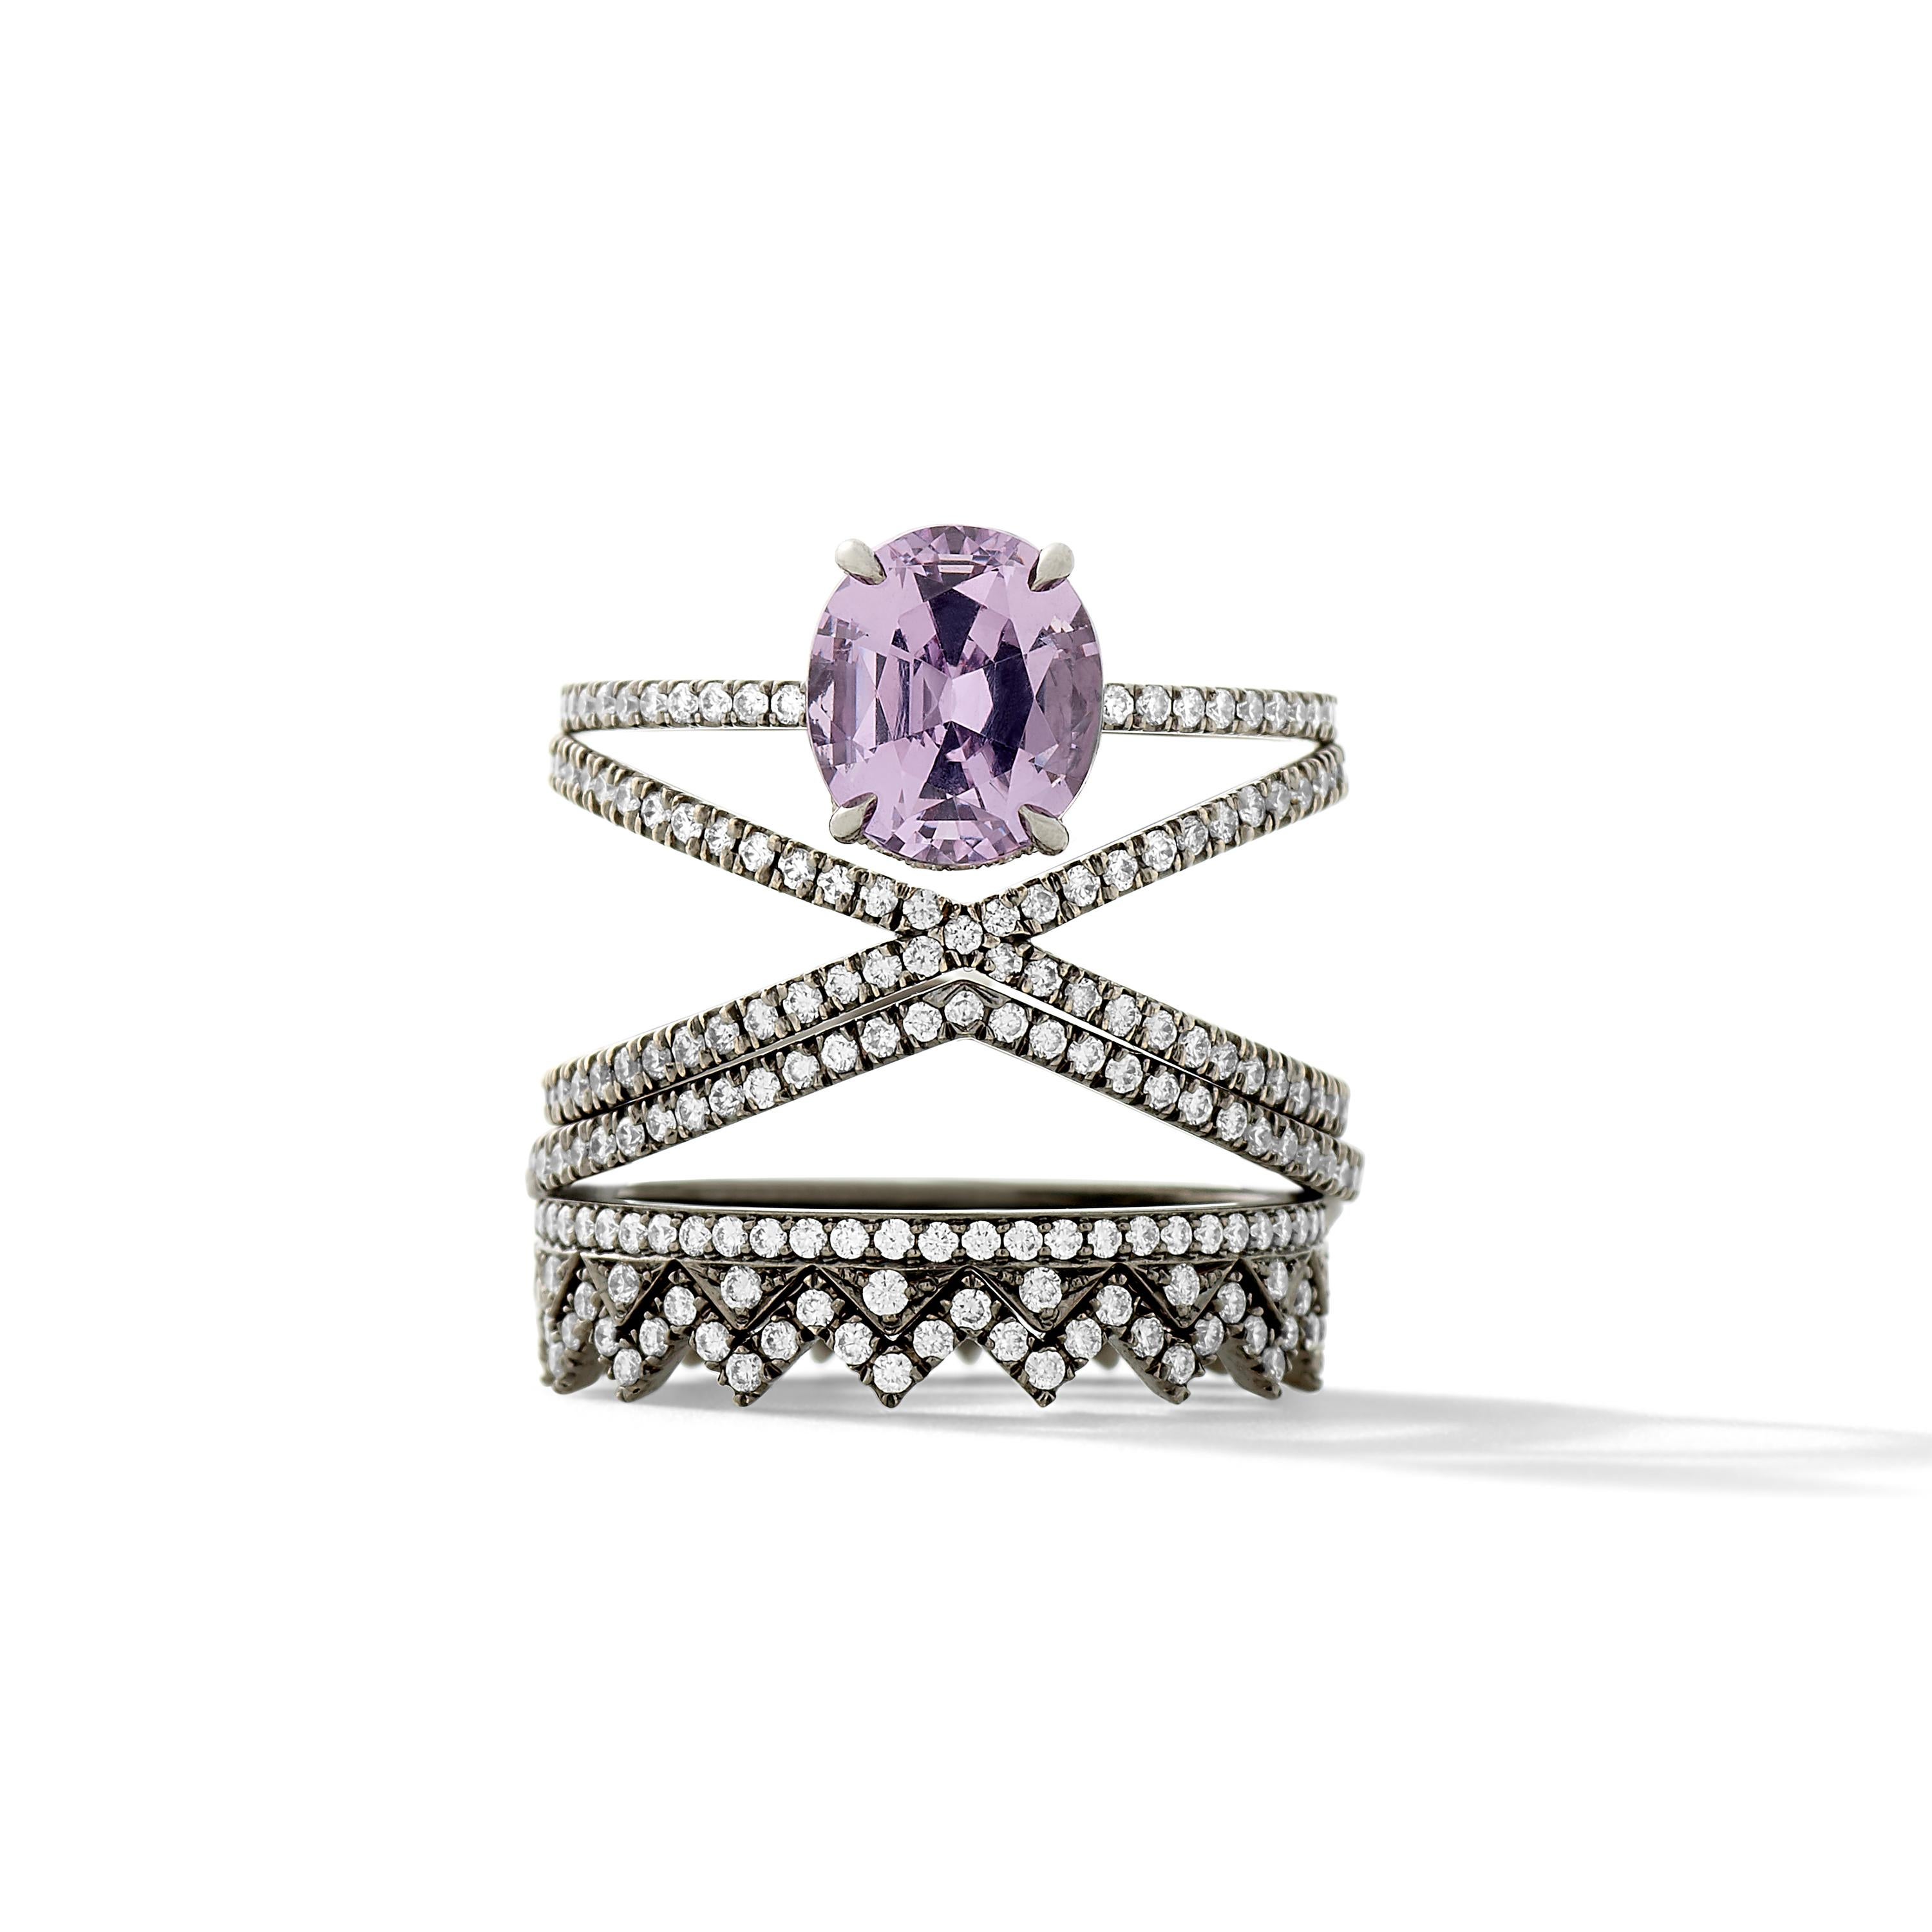 18k Blackened White Gold with 2.03 Ct Lavender Spinel and White Diamond Pavé - Size 6. 

Handmade in New York City.

Eva Fehren White, a bridal collection comprised of engagement rings and wedding bands, was launched in 2014, embodies the classic,